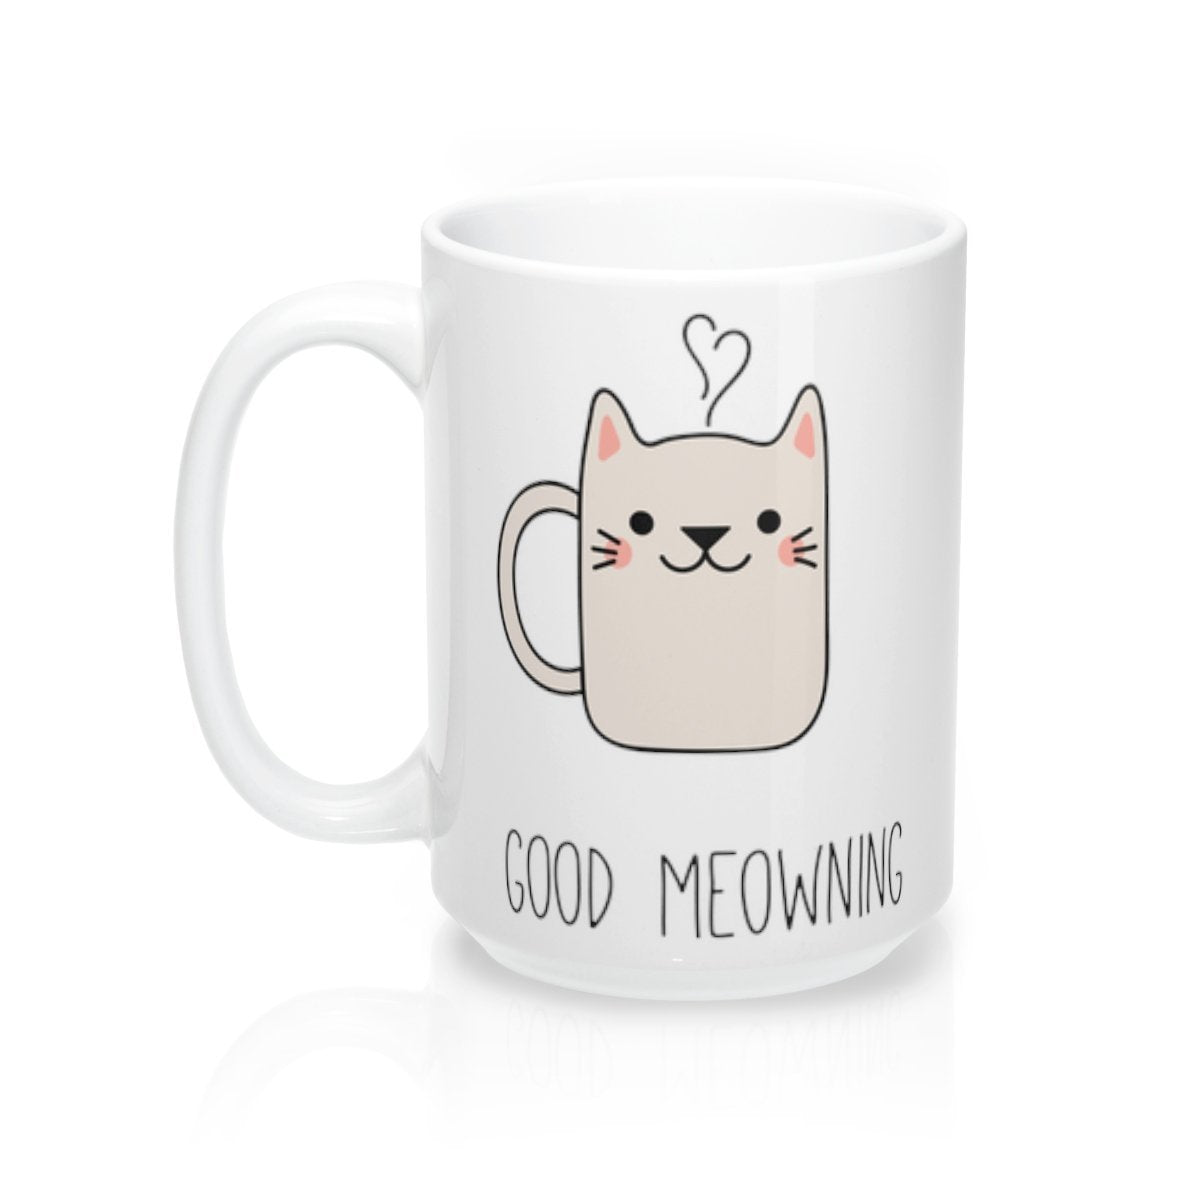 Funny Gifts for Cat Lovers, Cat Mug Featuring the Text "Good Meowning" Printed In Black